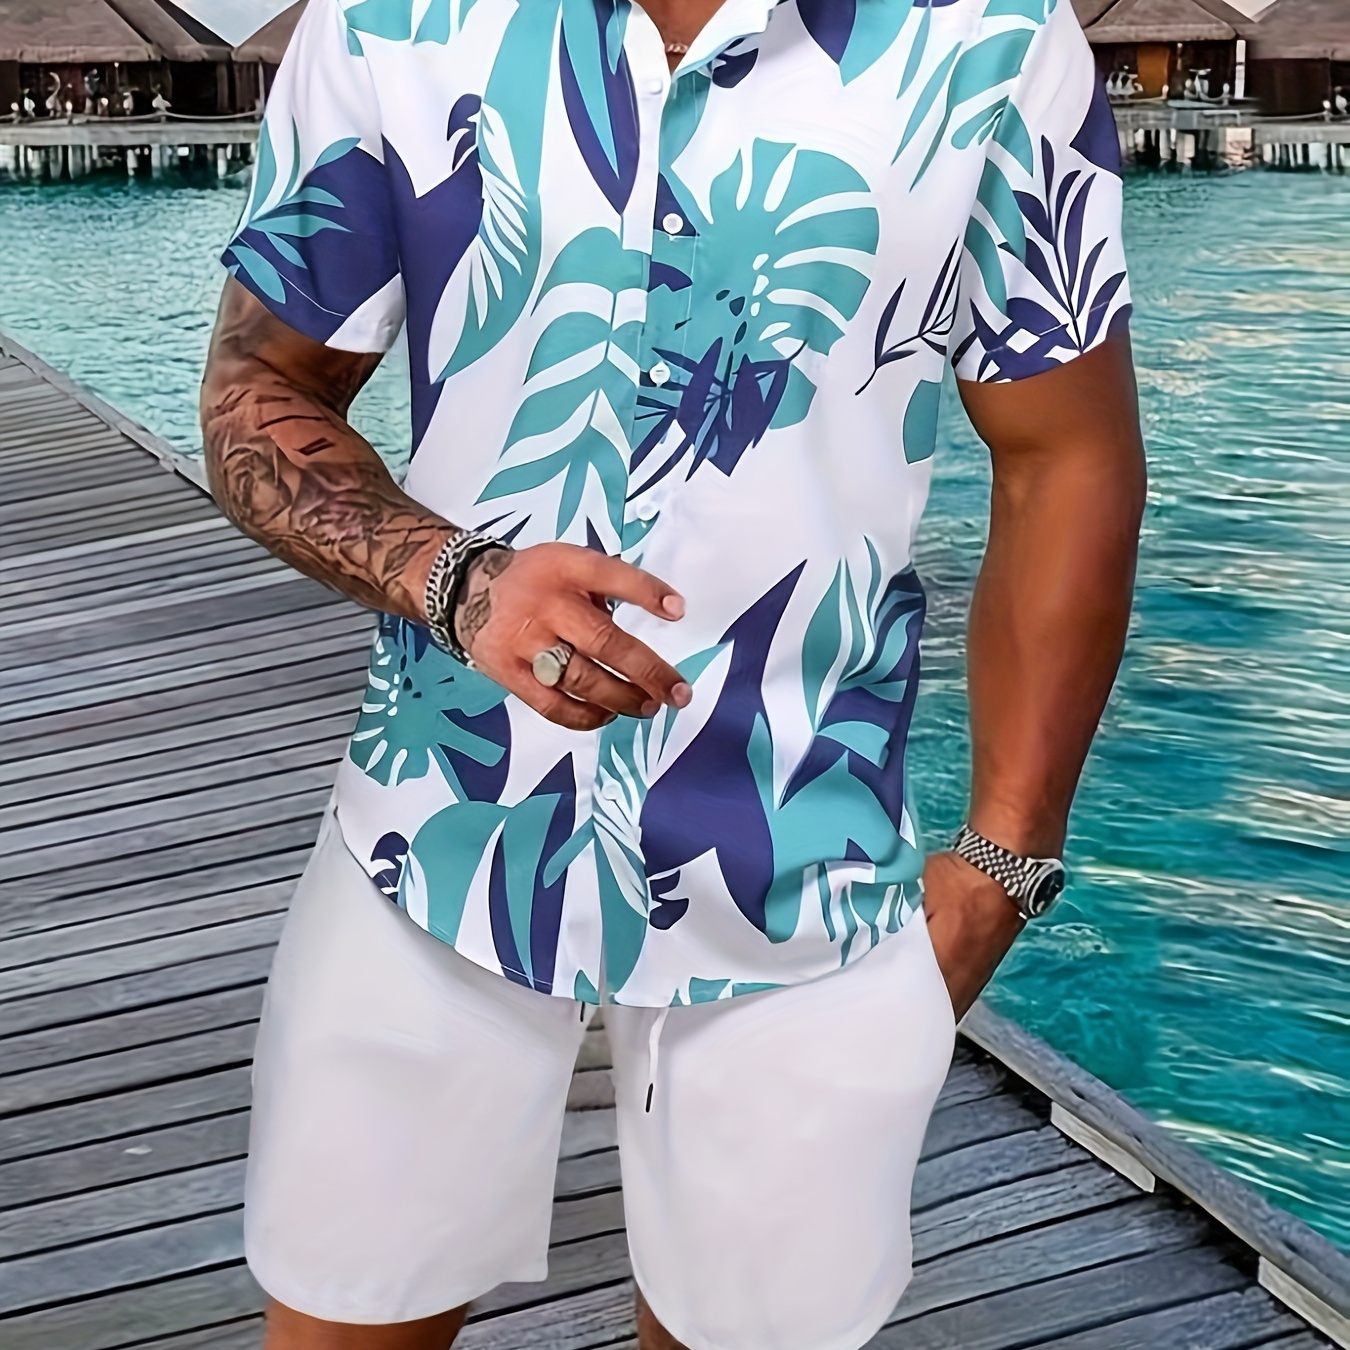 

Men's Trendy Hawaiian Lapel Collar Graphic Shirt With Stylish Leaf Print For Summer Vacation And Casual Wear